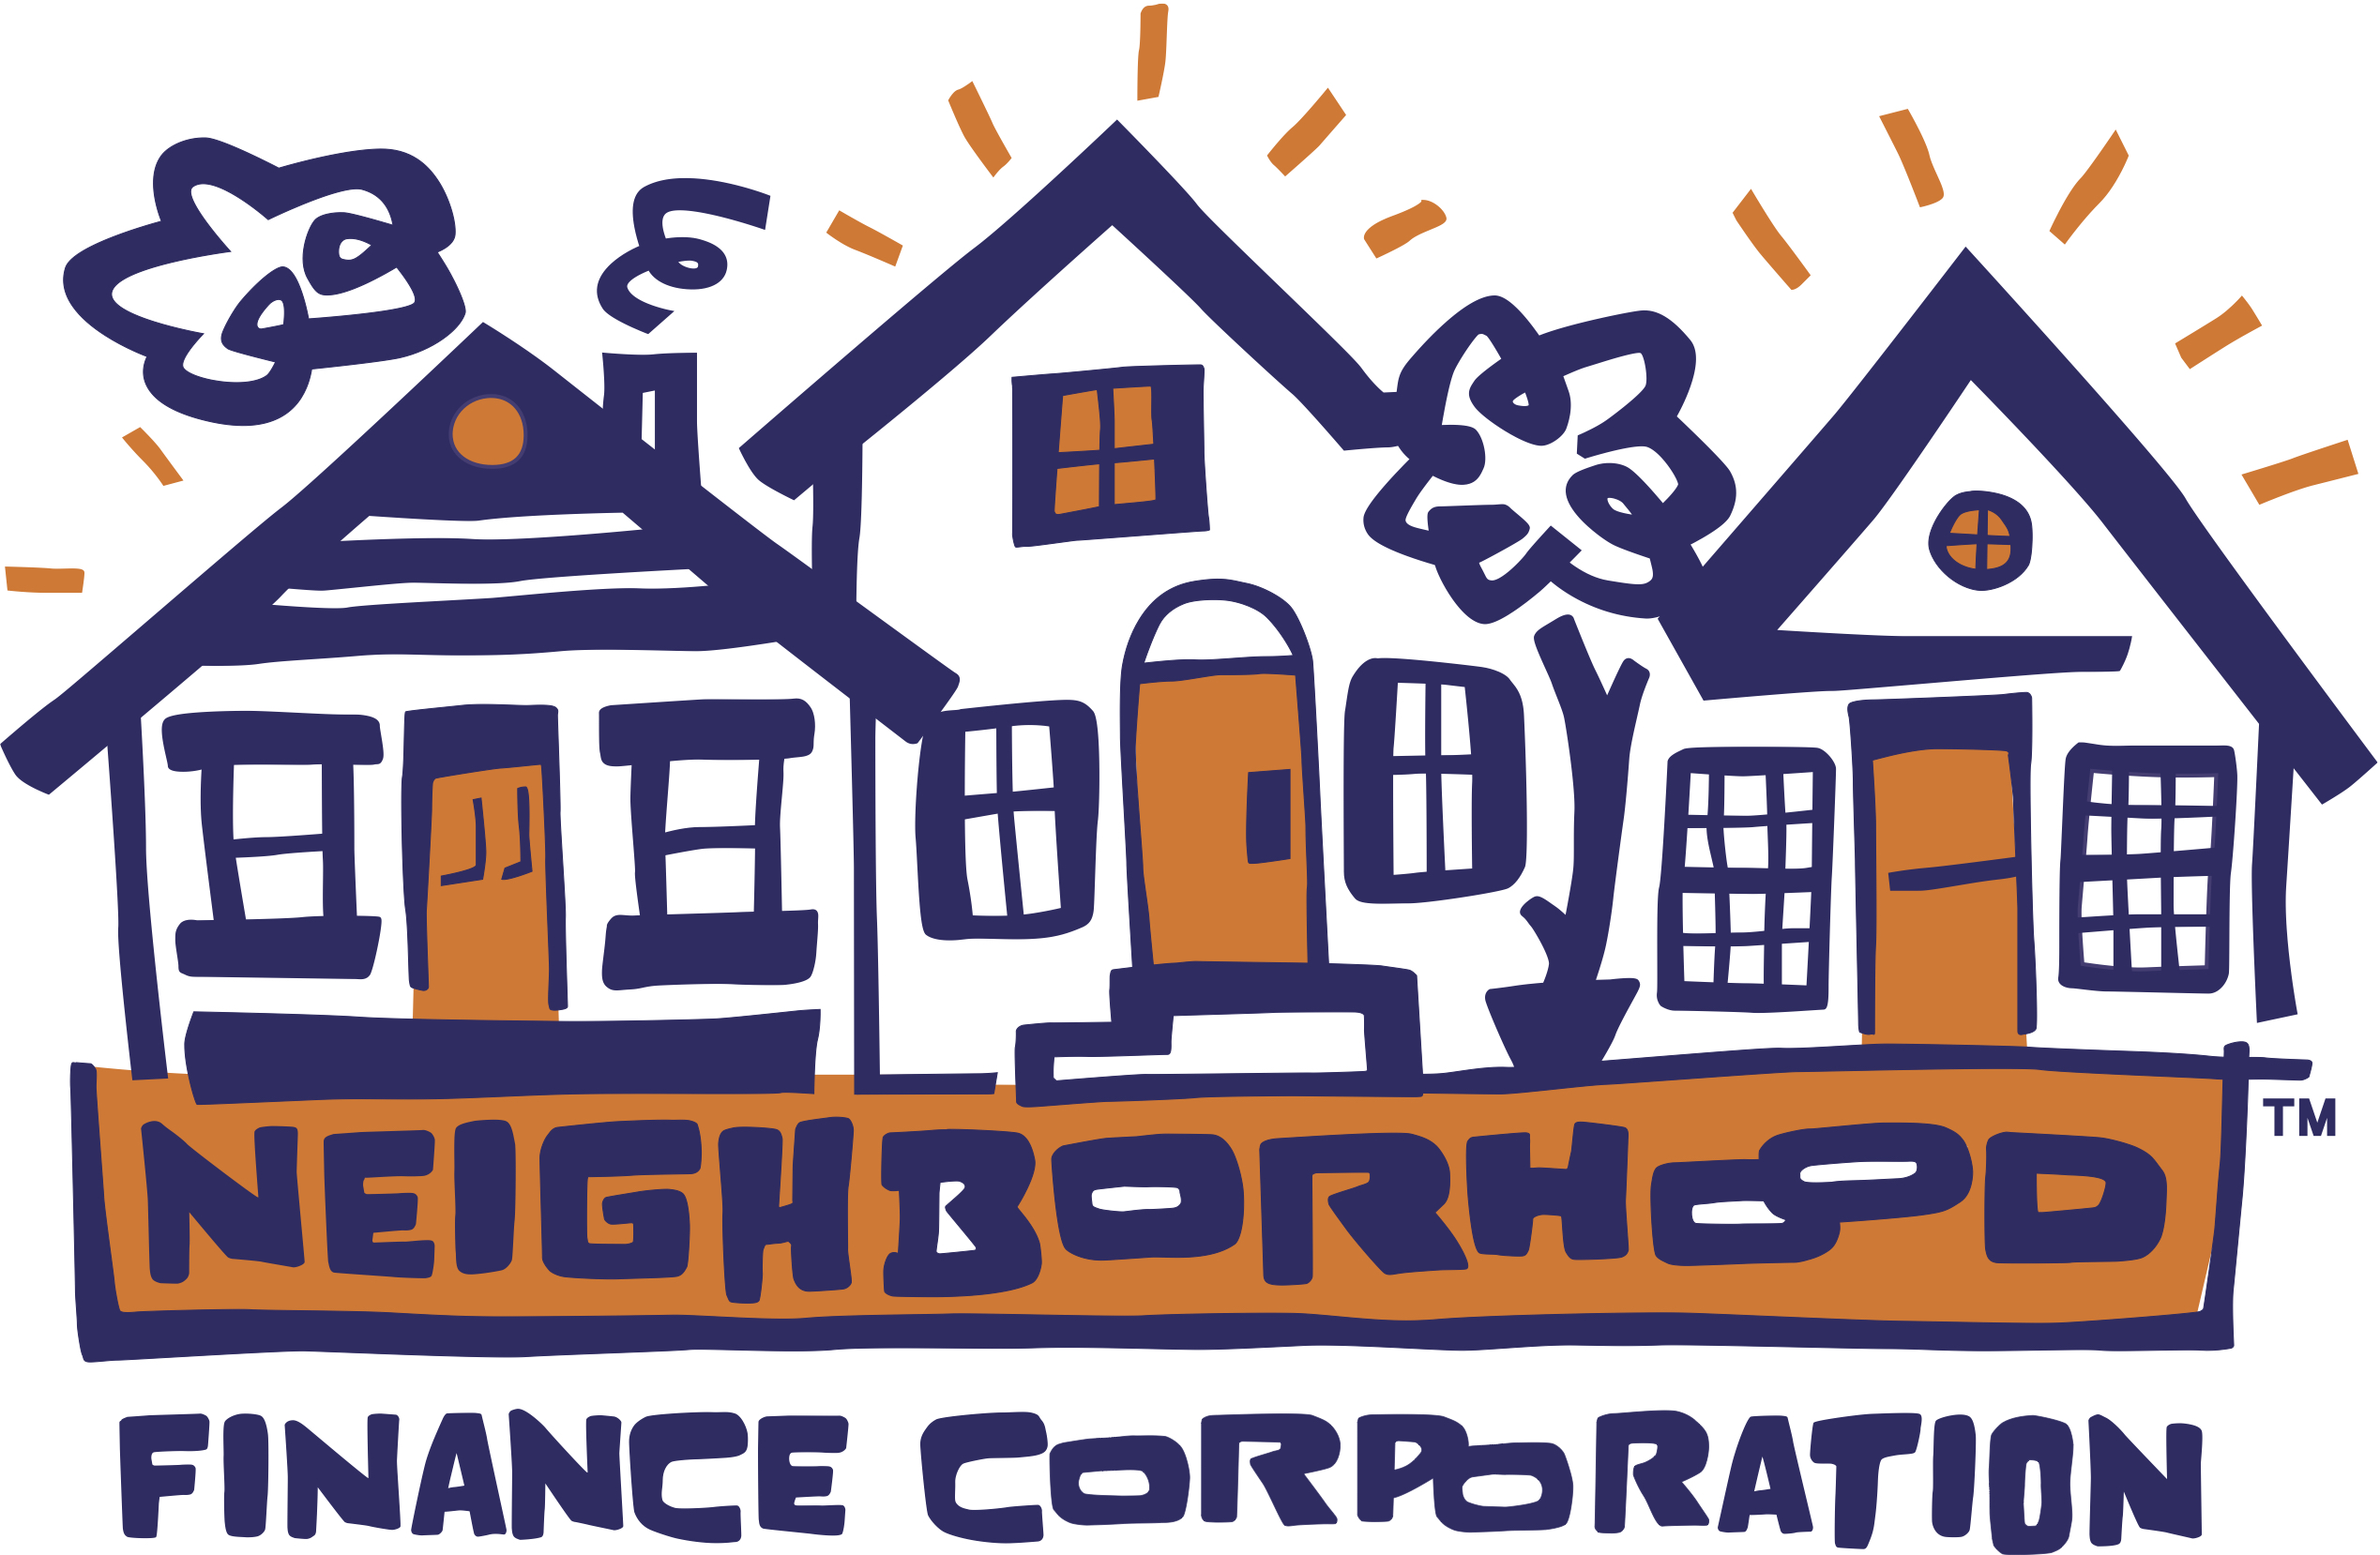 NFC provides unique lending programs and other services to facilitate neighborhood revitalization in Polk County and Cedar Rapids, Iowa through partnerships with residents, governments, community-based organizations, lending institutions and the business community. NMLS #8943